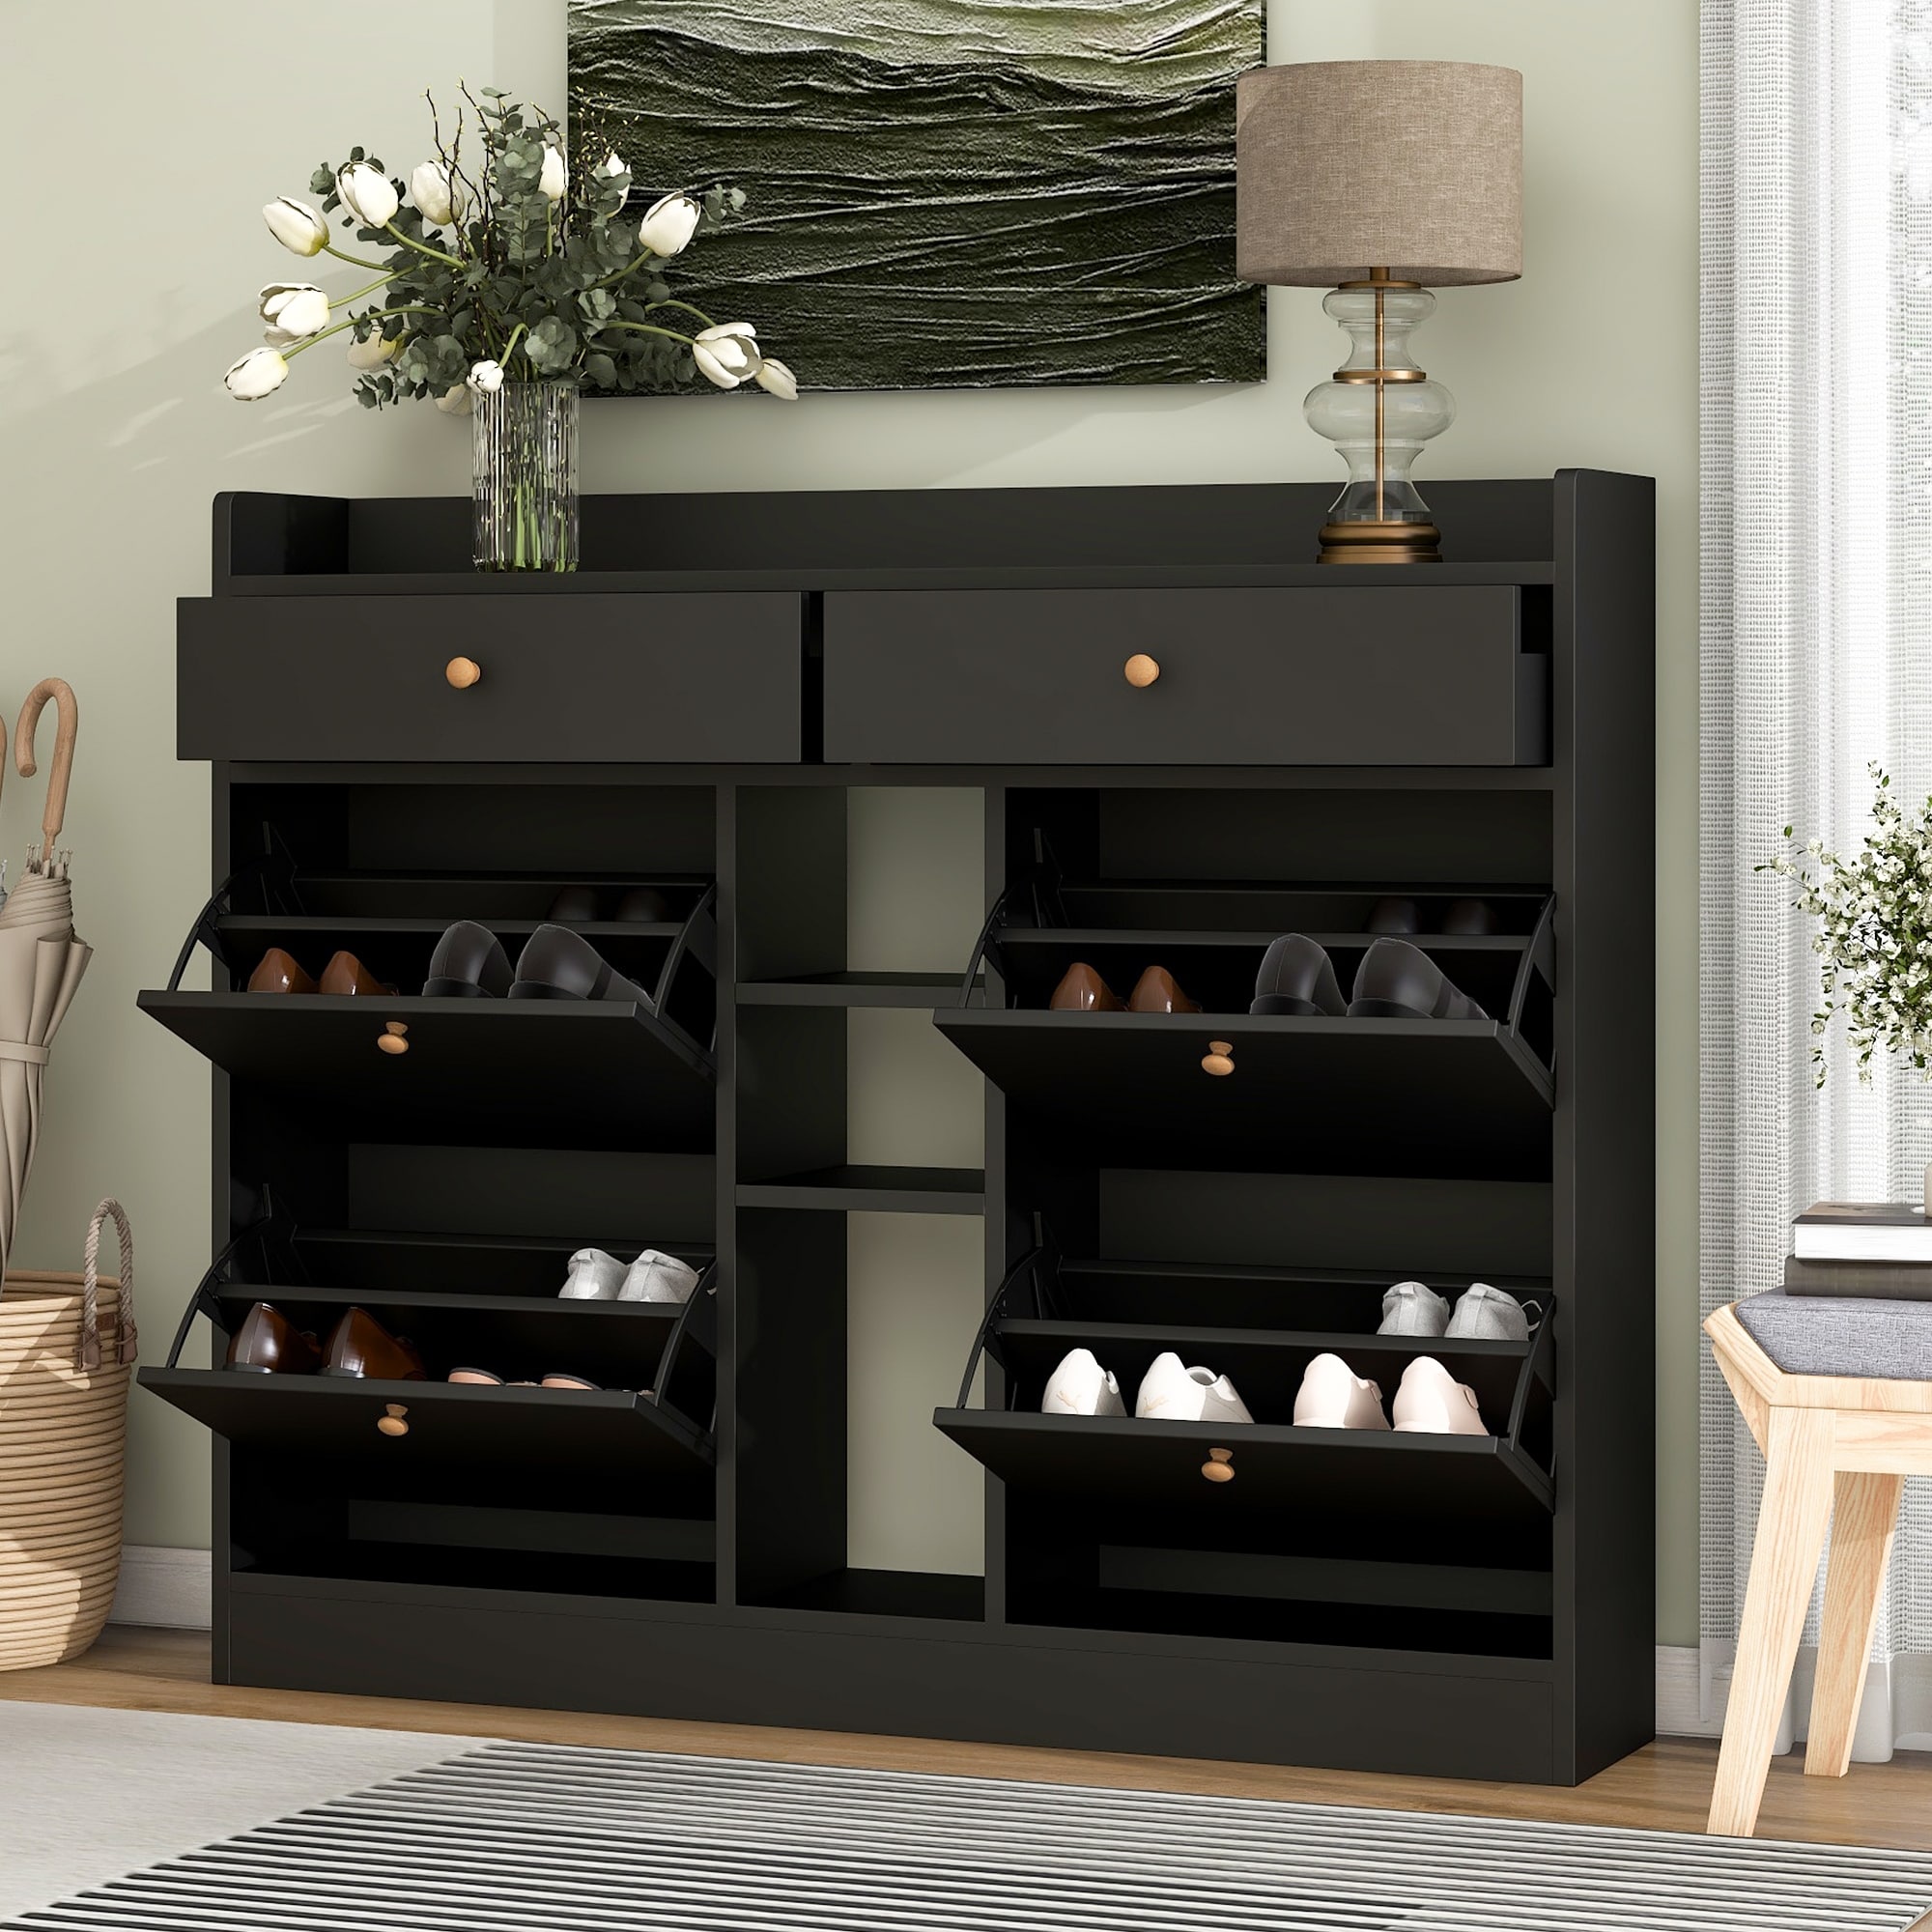 https://ak1.ostkcdn.com/images/products/is/images/direct/dcf2f449082f5a1616ba4554ca8ce07b0b792294/Modern-Shoe-Cabinet-with-4-Flip-Drawers%2C-Multifunctional-2-Tier-Free-Standing-Shoe-Rack-with-2-Drawers%2C-for-Entrance-Hallway.jpg